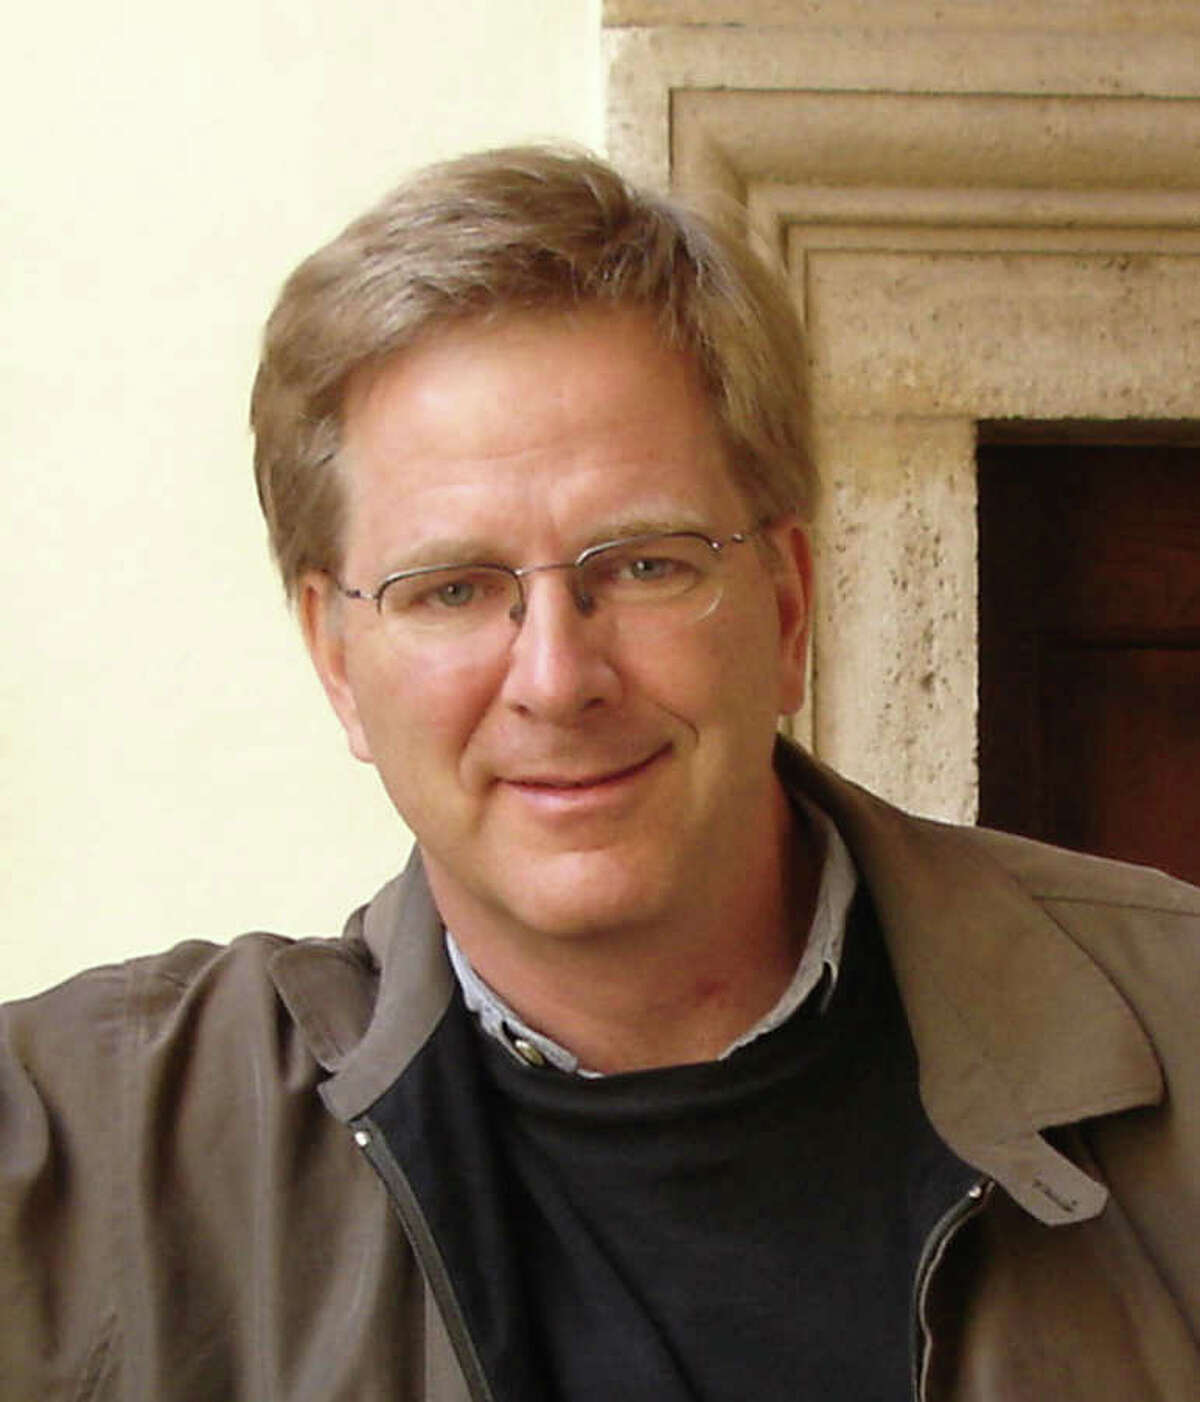 Rick Steves writes European travel guidebooks and hosts travel shows on public television and public radio.